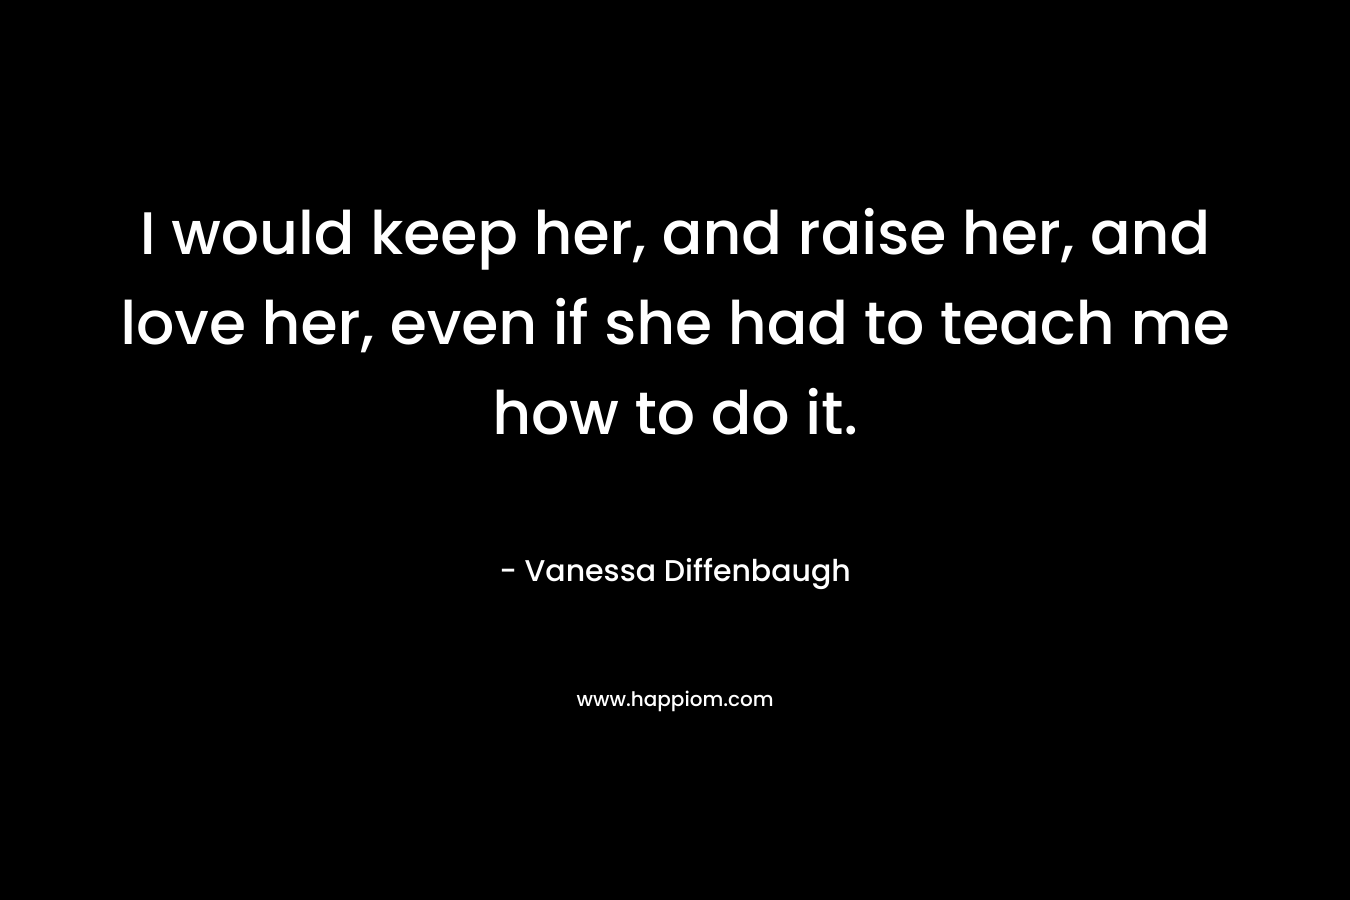 I would keep her, and raise her, and love her, even if she had to teach me how to do it. – Vanessa Diffenbaugh